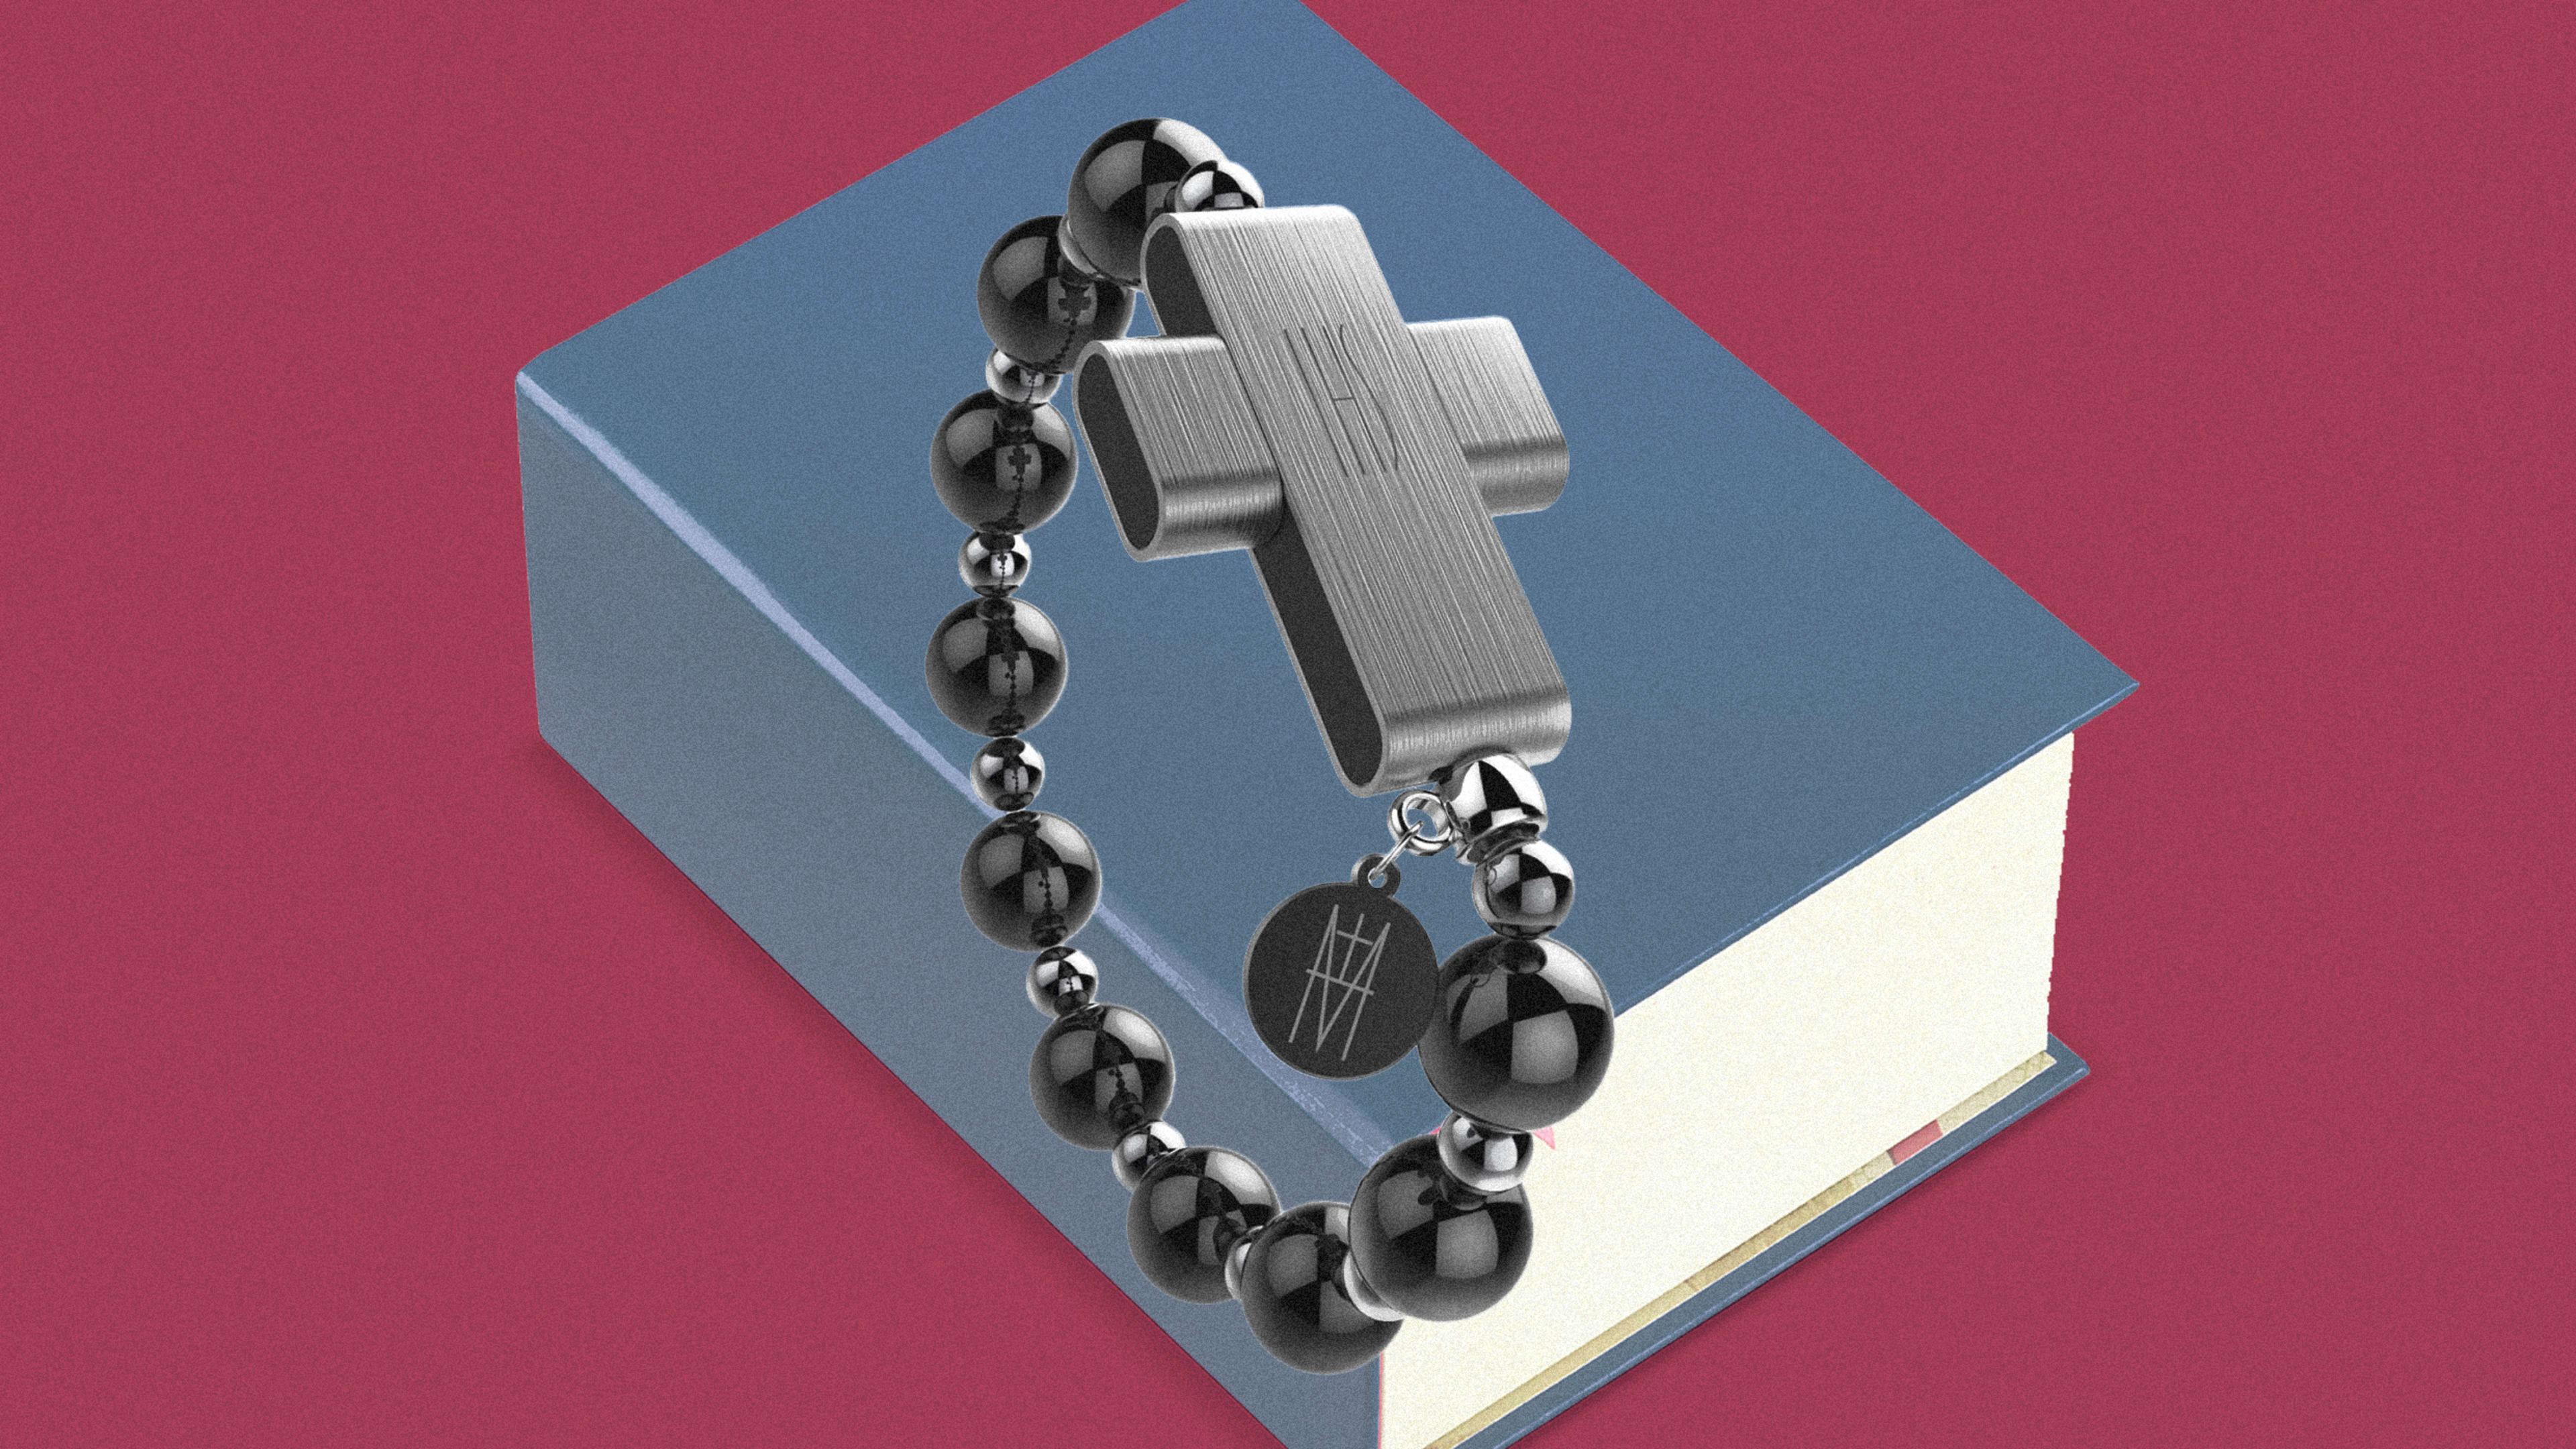 The pope’s first wearable is a $110 rosary that tracks your prayers